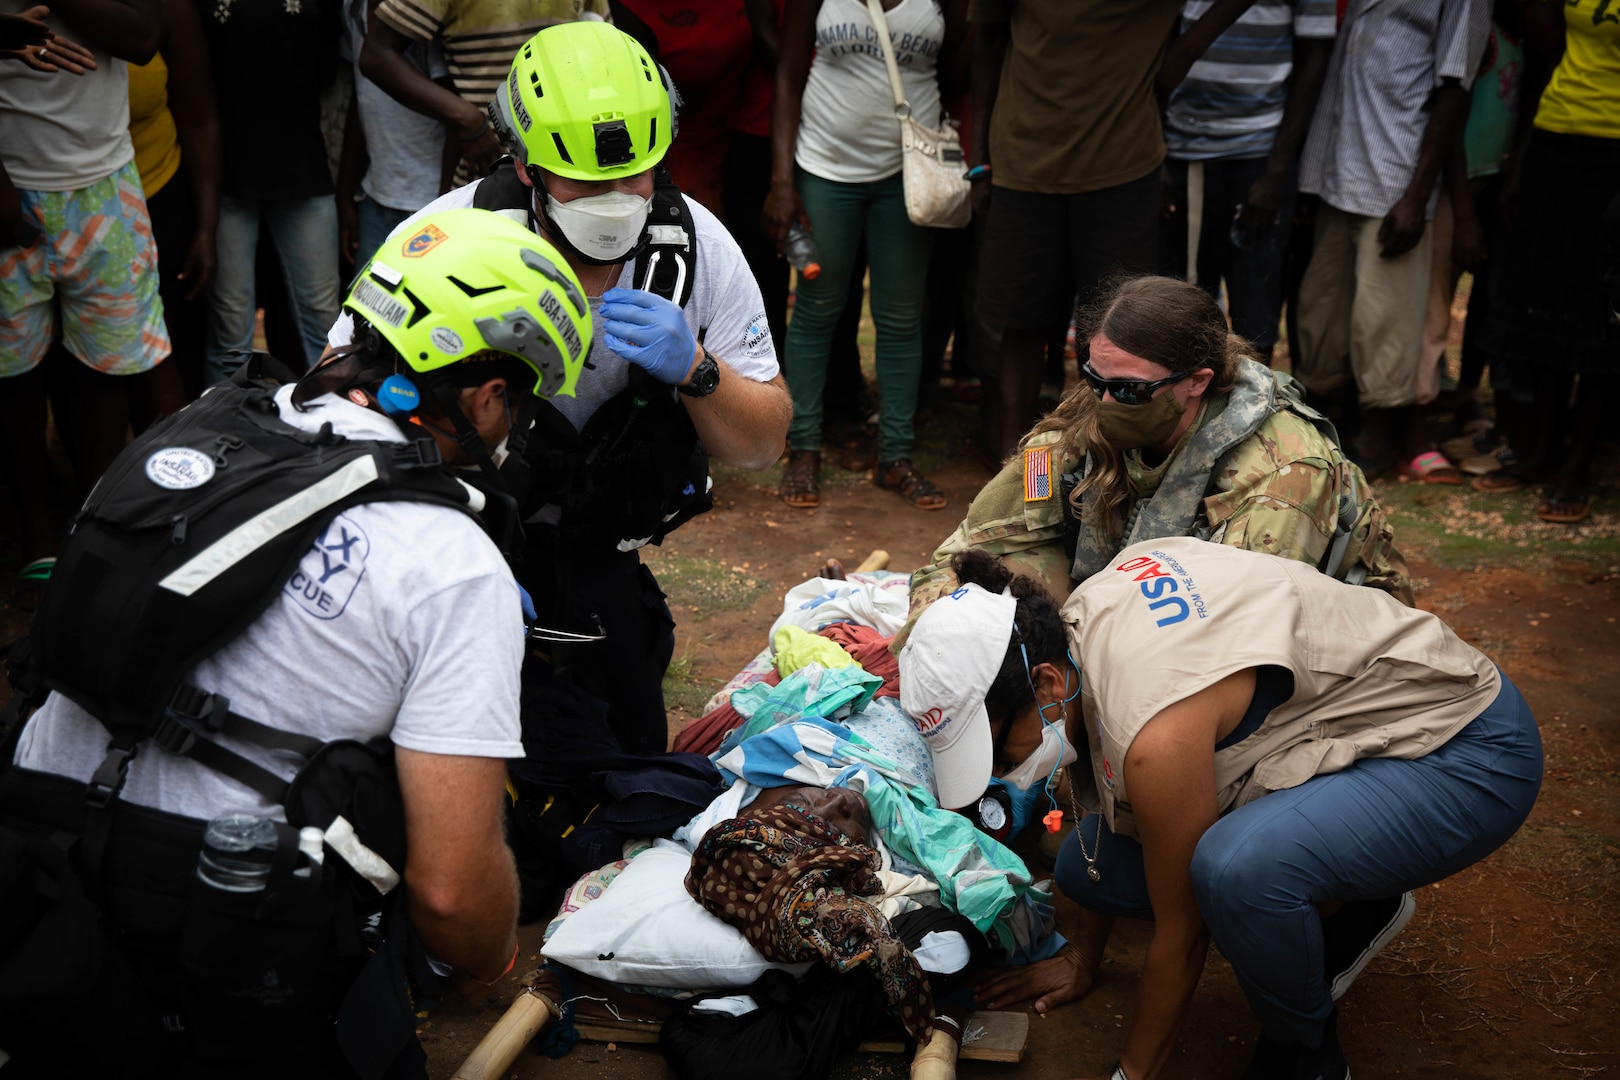 A service member and several civilians tend to a person in a stretcher on the ground.